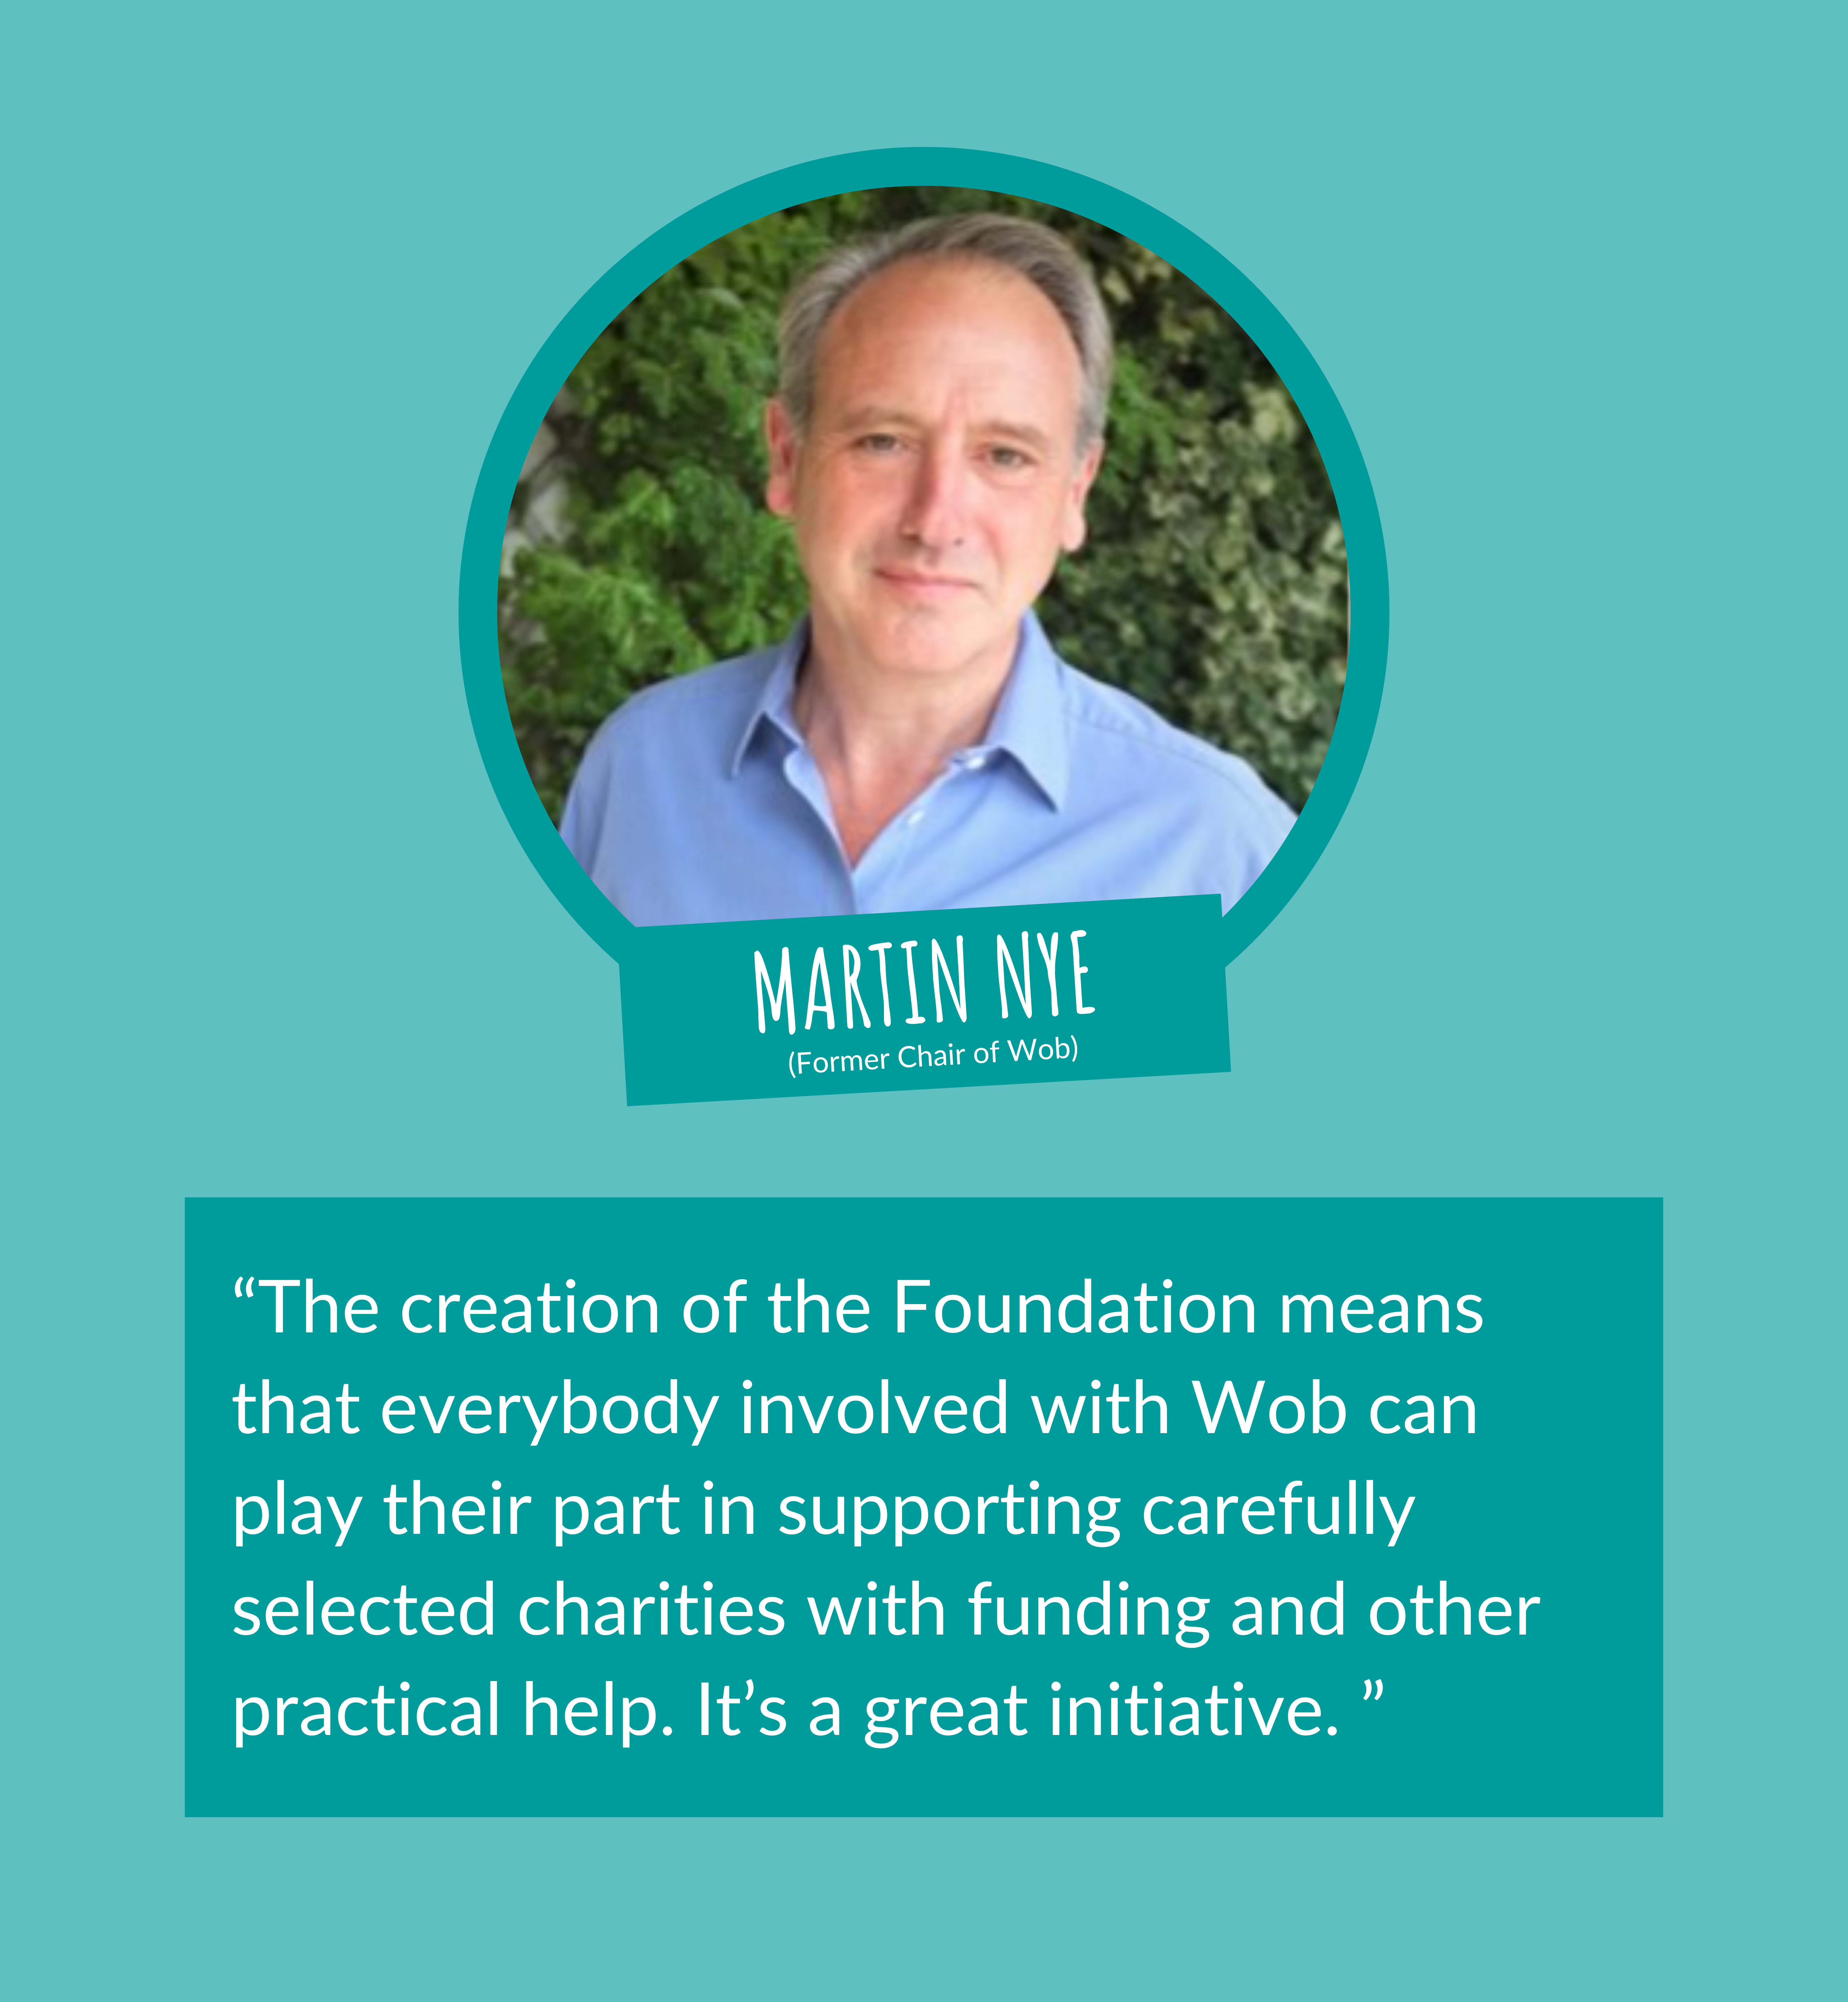 The creation of the Foundation means that everybody involved with Wob can play their part in supporting carefully selected charities with funding and other practical help. It's a great initiative - Martin Nye, Former Chair of Wob